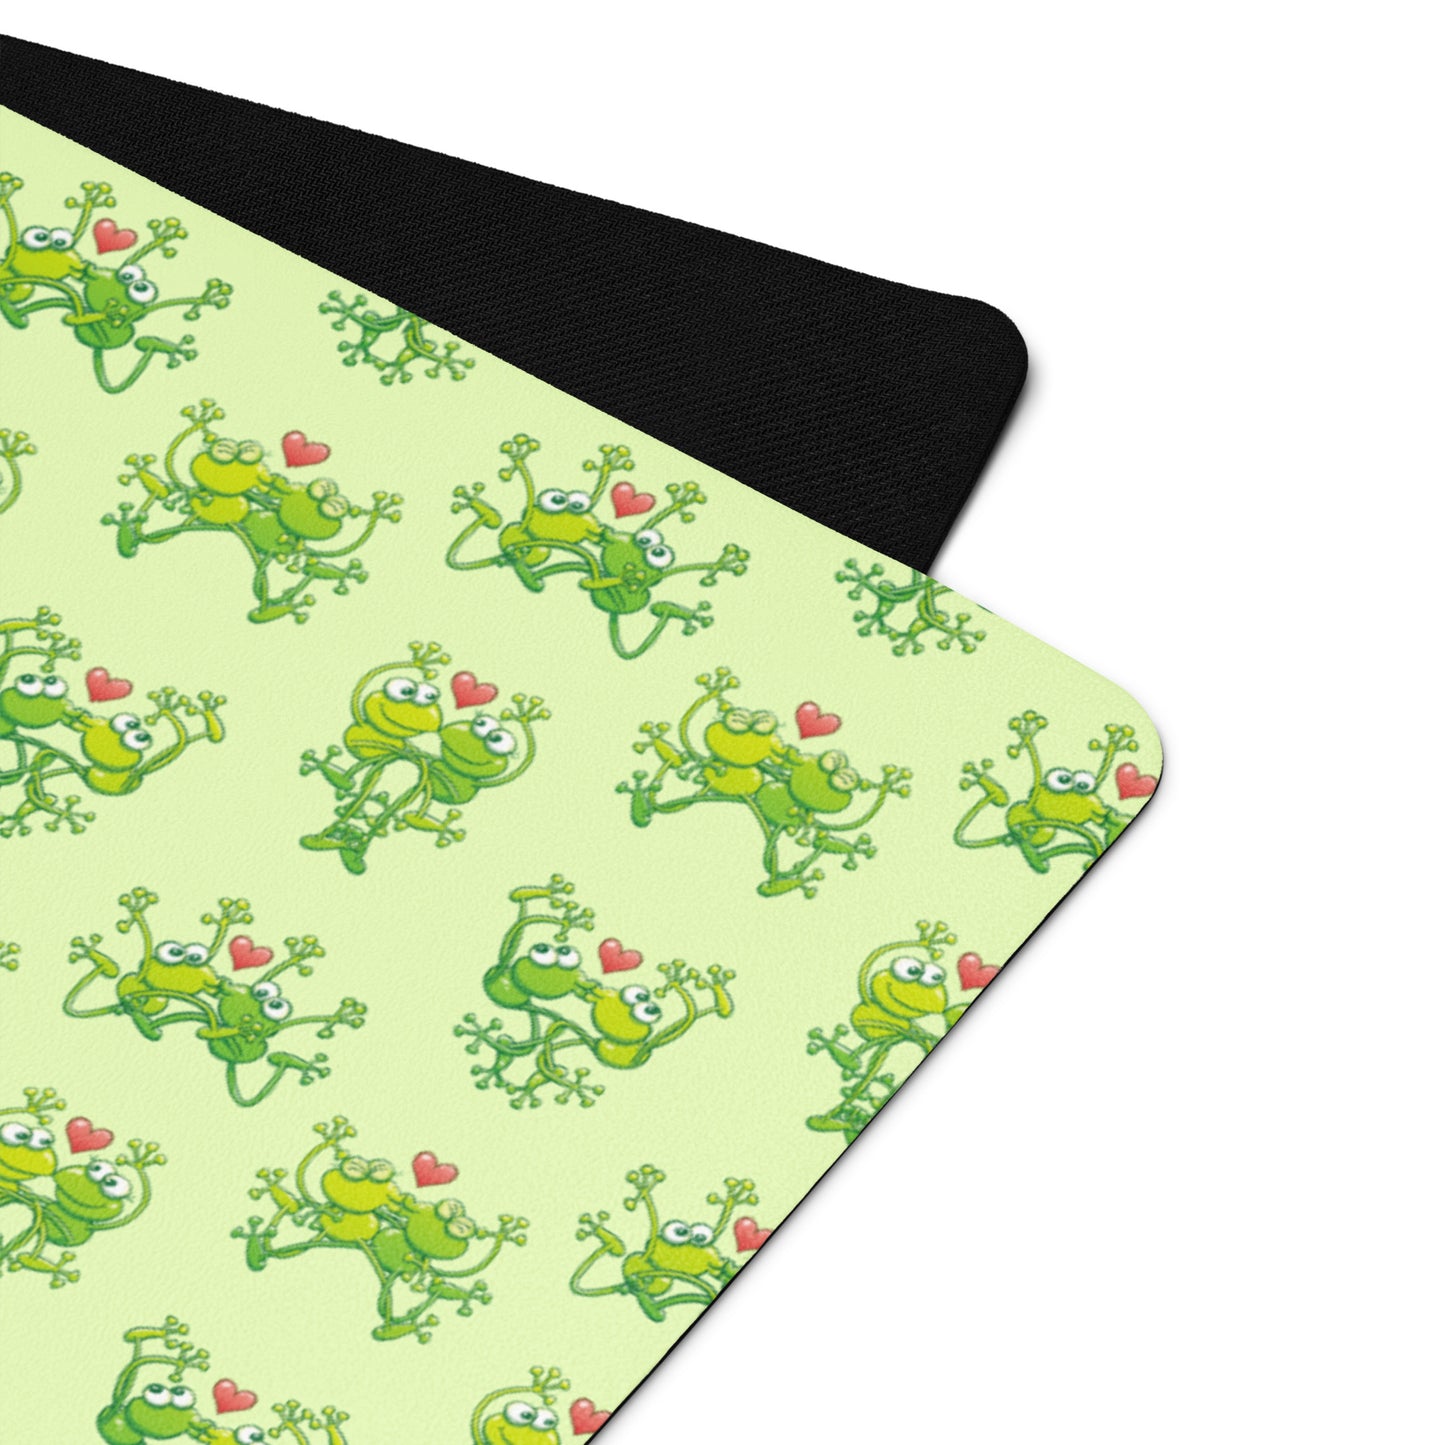 Green frogs are calling for love Yoga mat. Overview